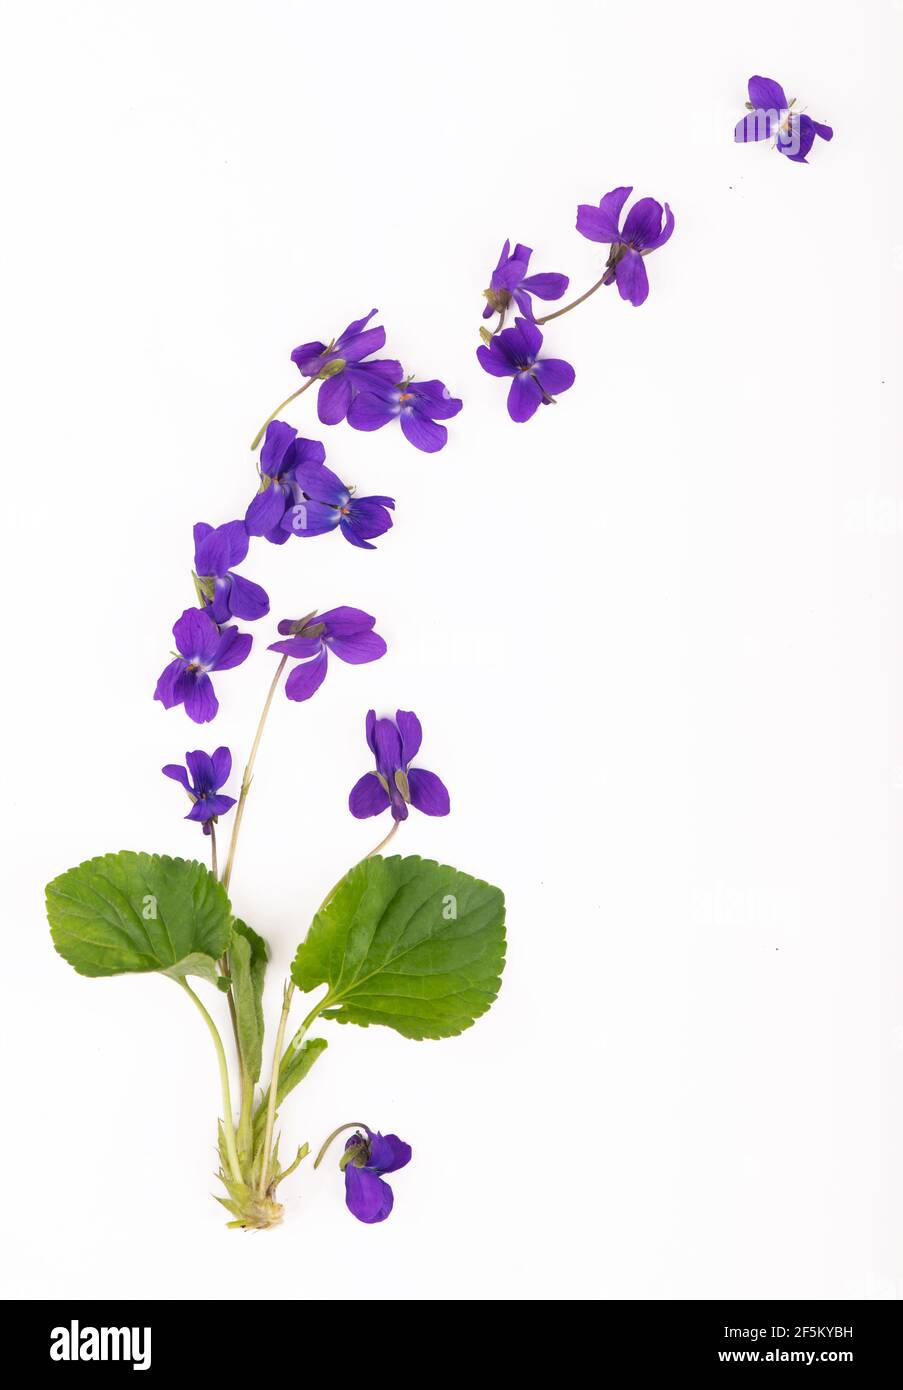 Green leaf and flowers of Wood violet Viola odorata isolated on white background. Medicinal and garden plant Stock Photo